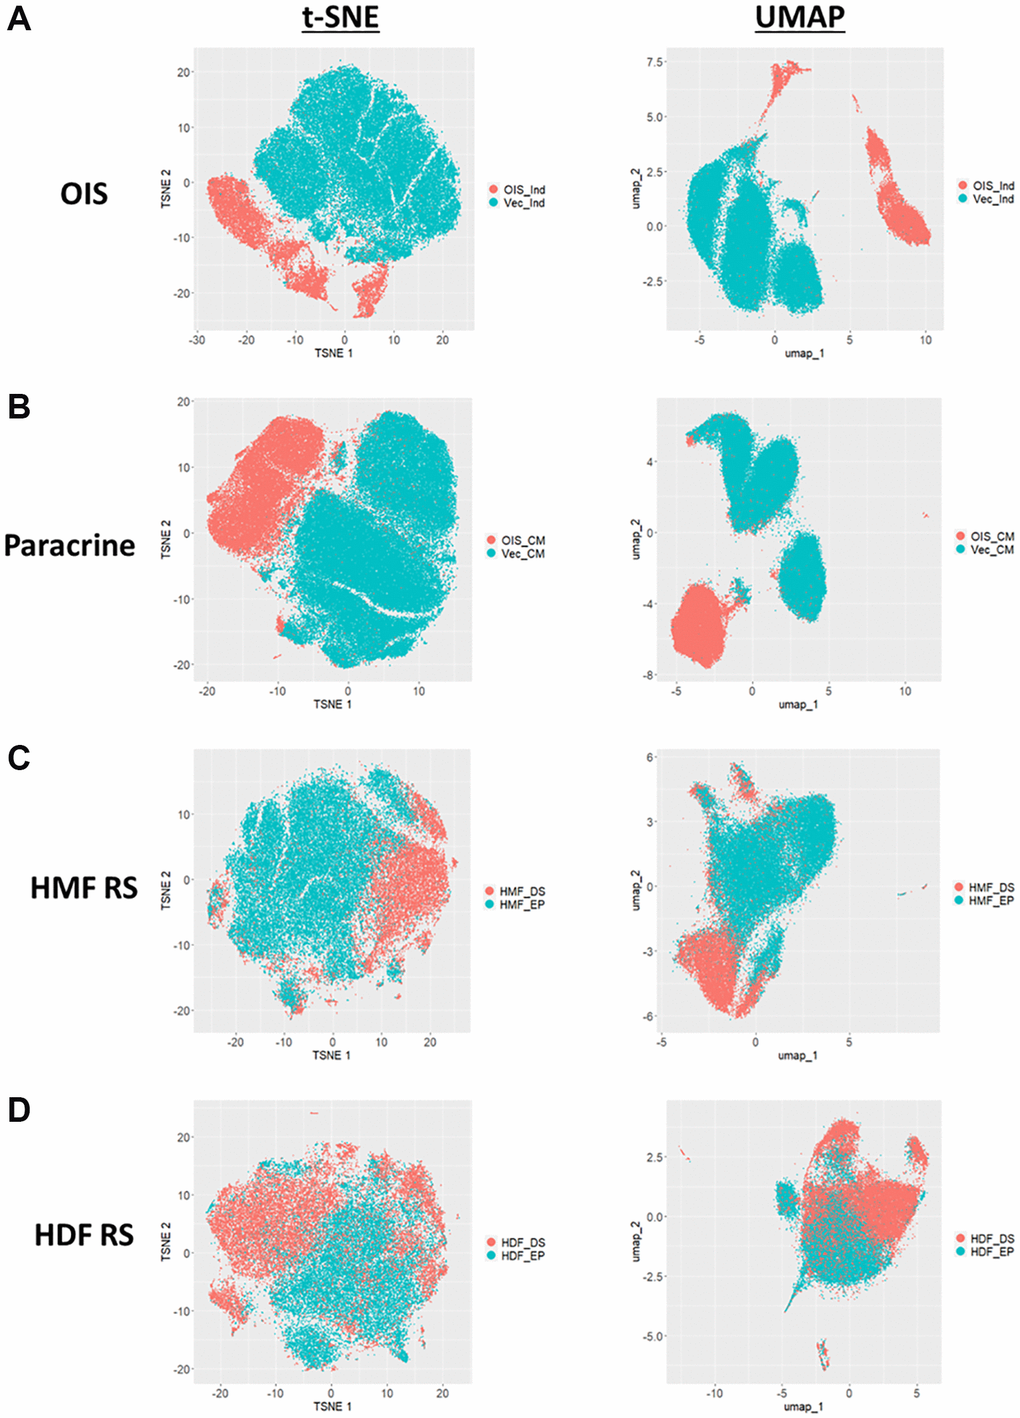 t-SNE and UMAP profiles for single target morphological profiles. (A–D) t-SNE and UMAP plots for oncogene-induced senescence (OIS), paracrine senescence (Paracrine), HMF replicative senescence (HMF RS) and HDF replicative senescence (HDF RS) models. Proliferating conditions (Blue): vector induction (Vec